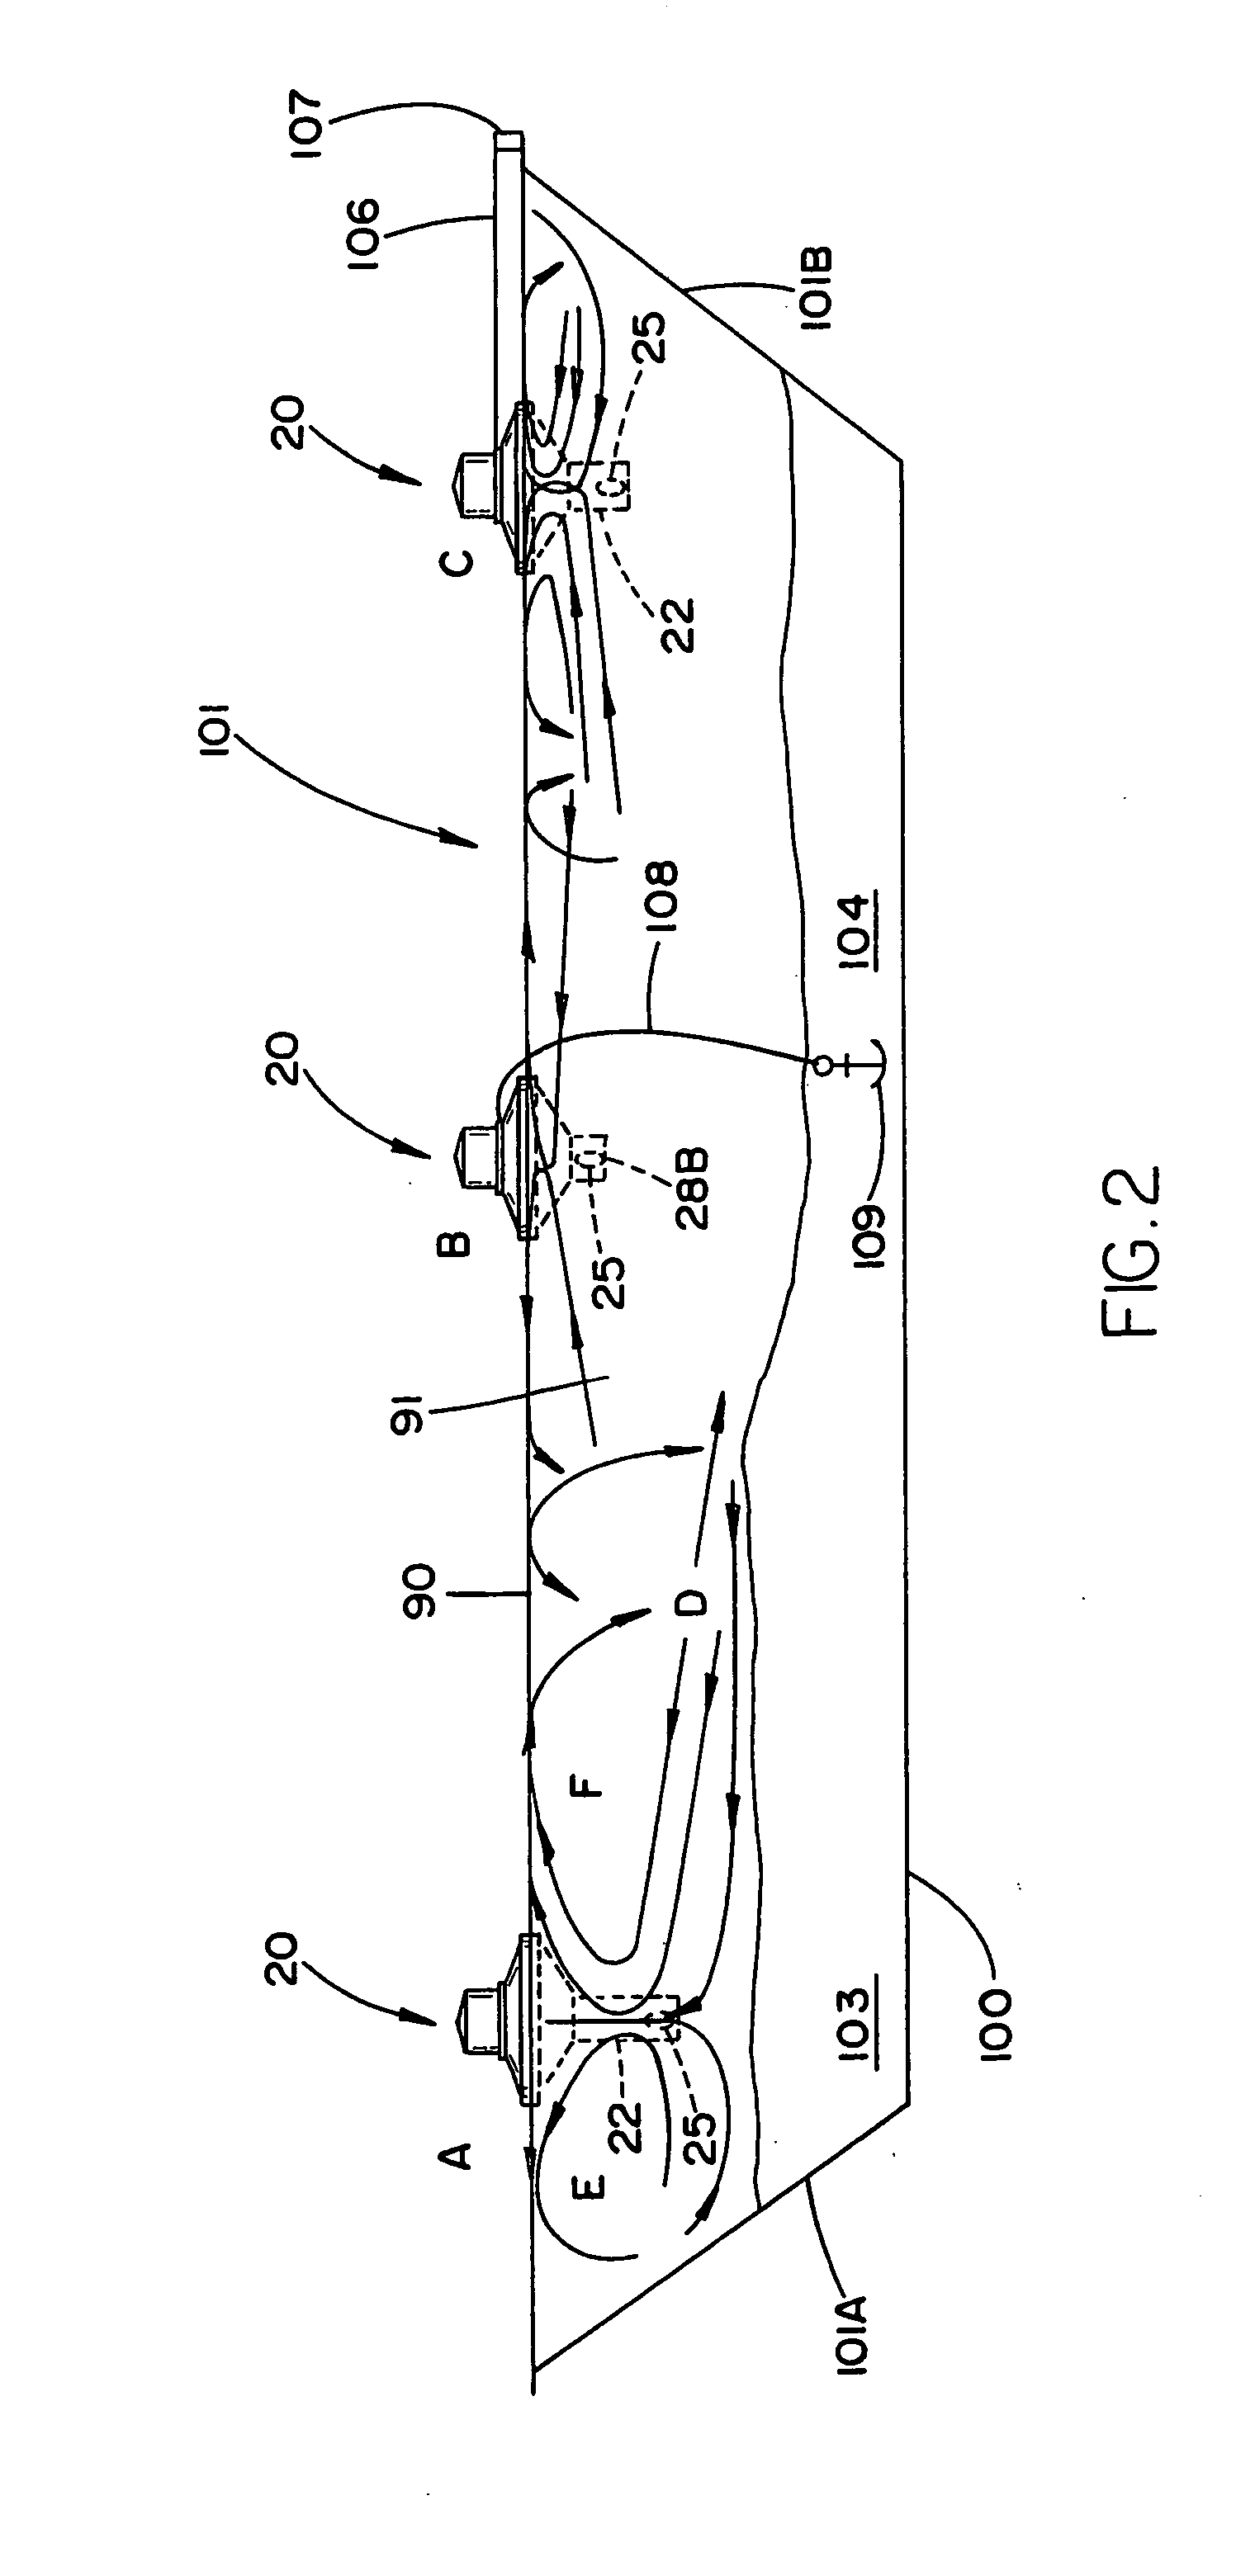 Process and apparatus for increasing biological activity in waste treatment in bodies of water